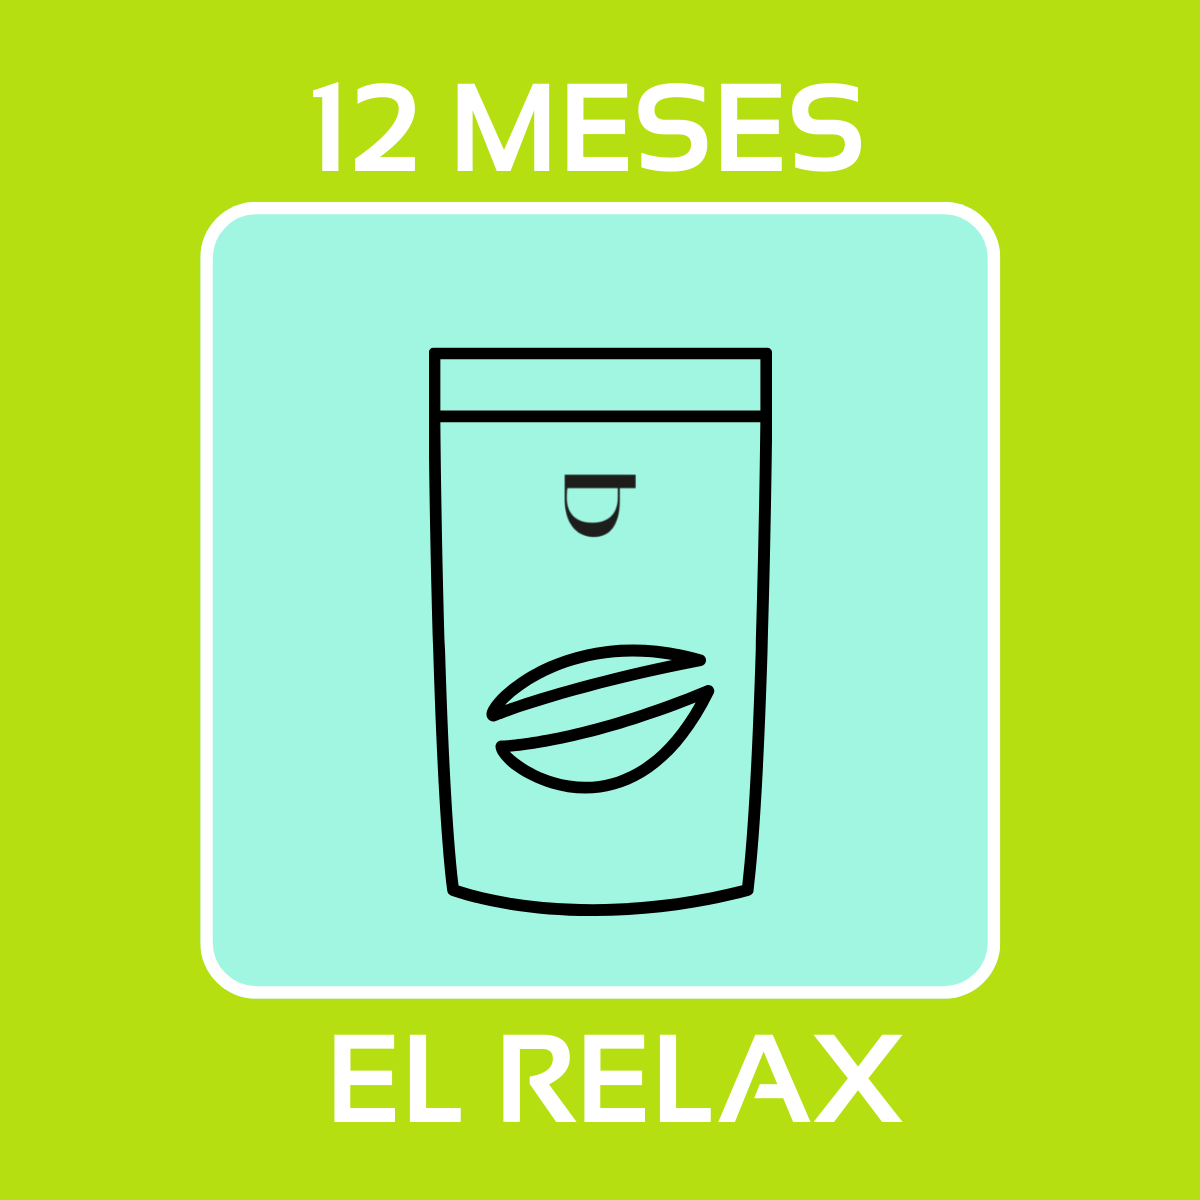 RELAX 12 MESES